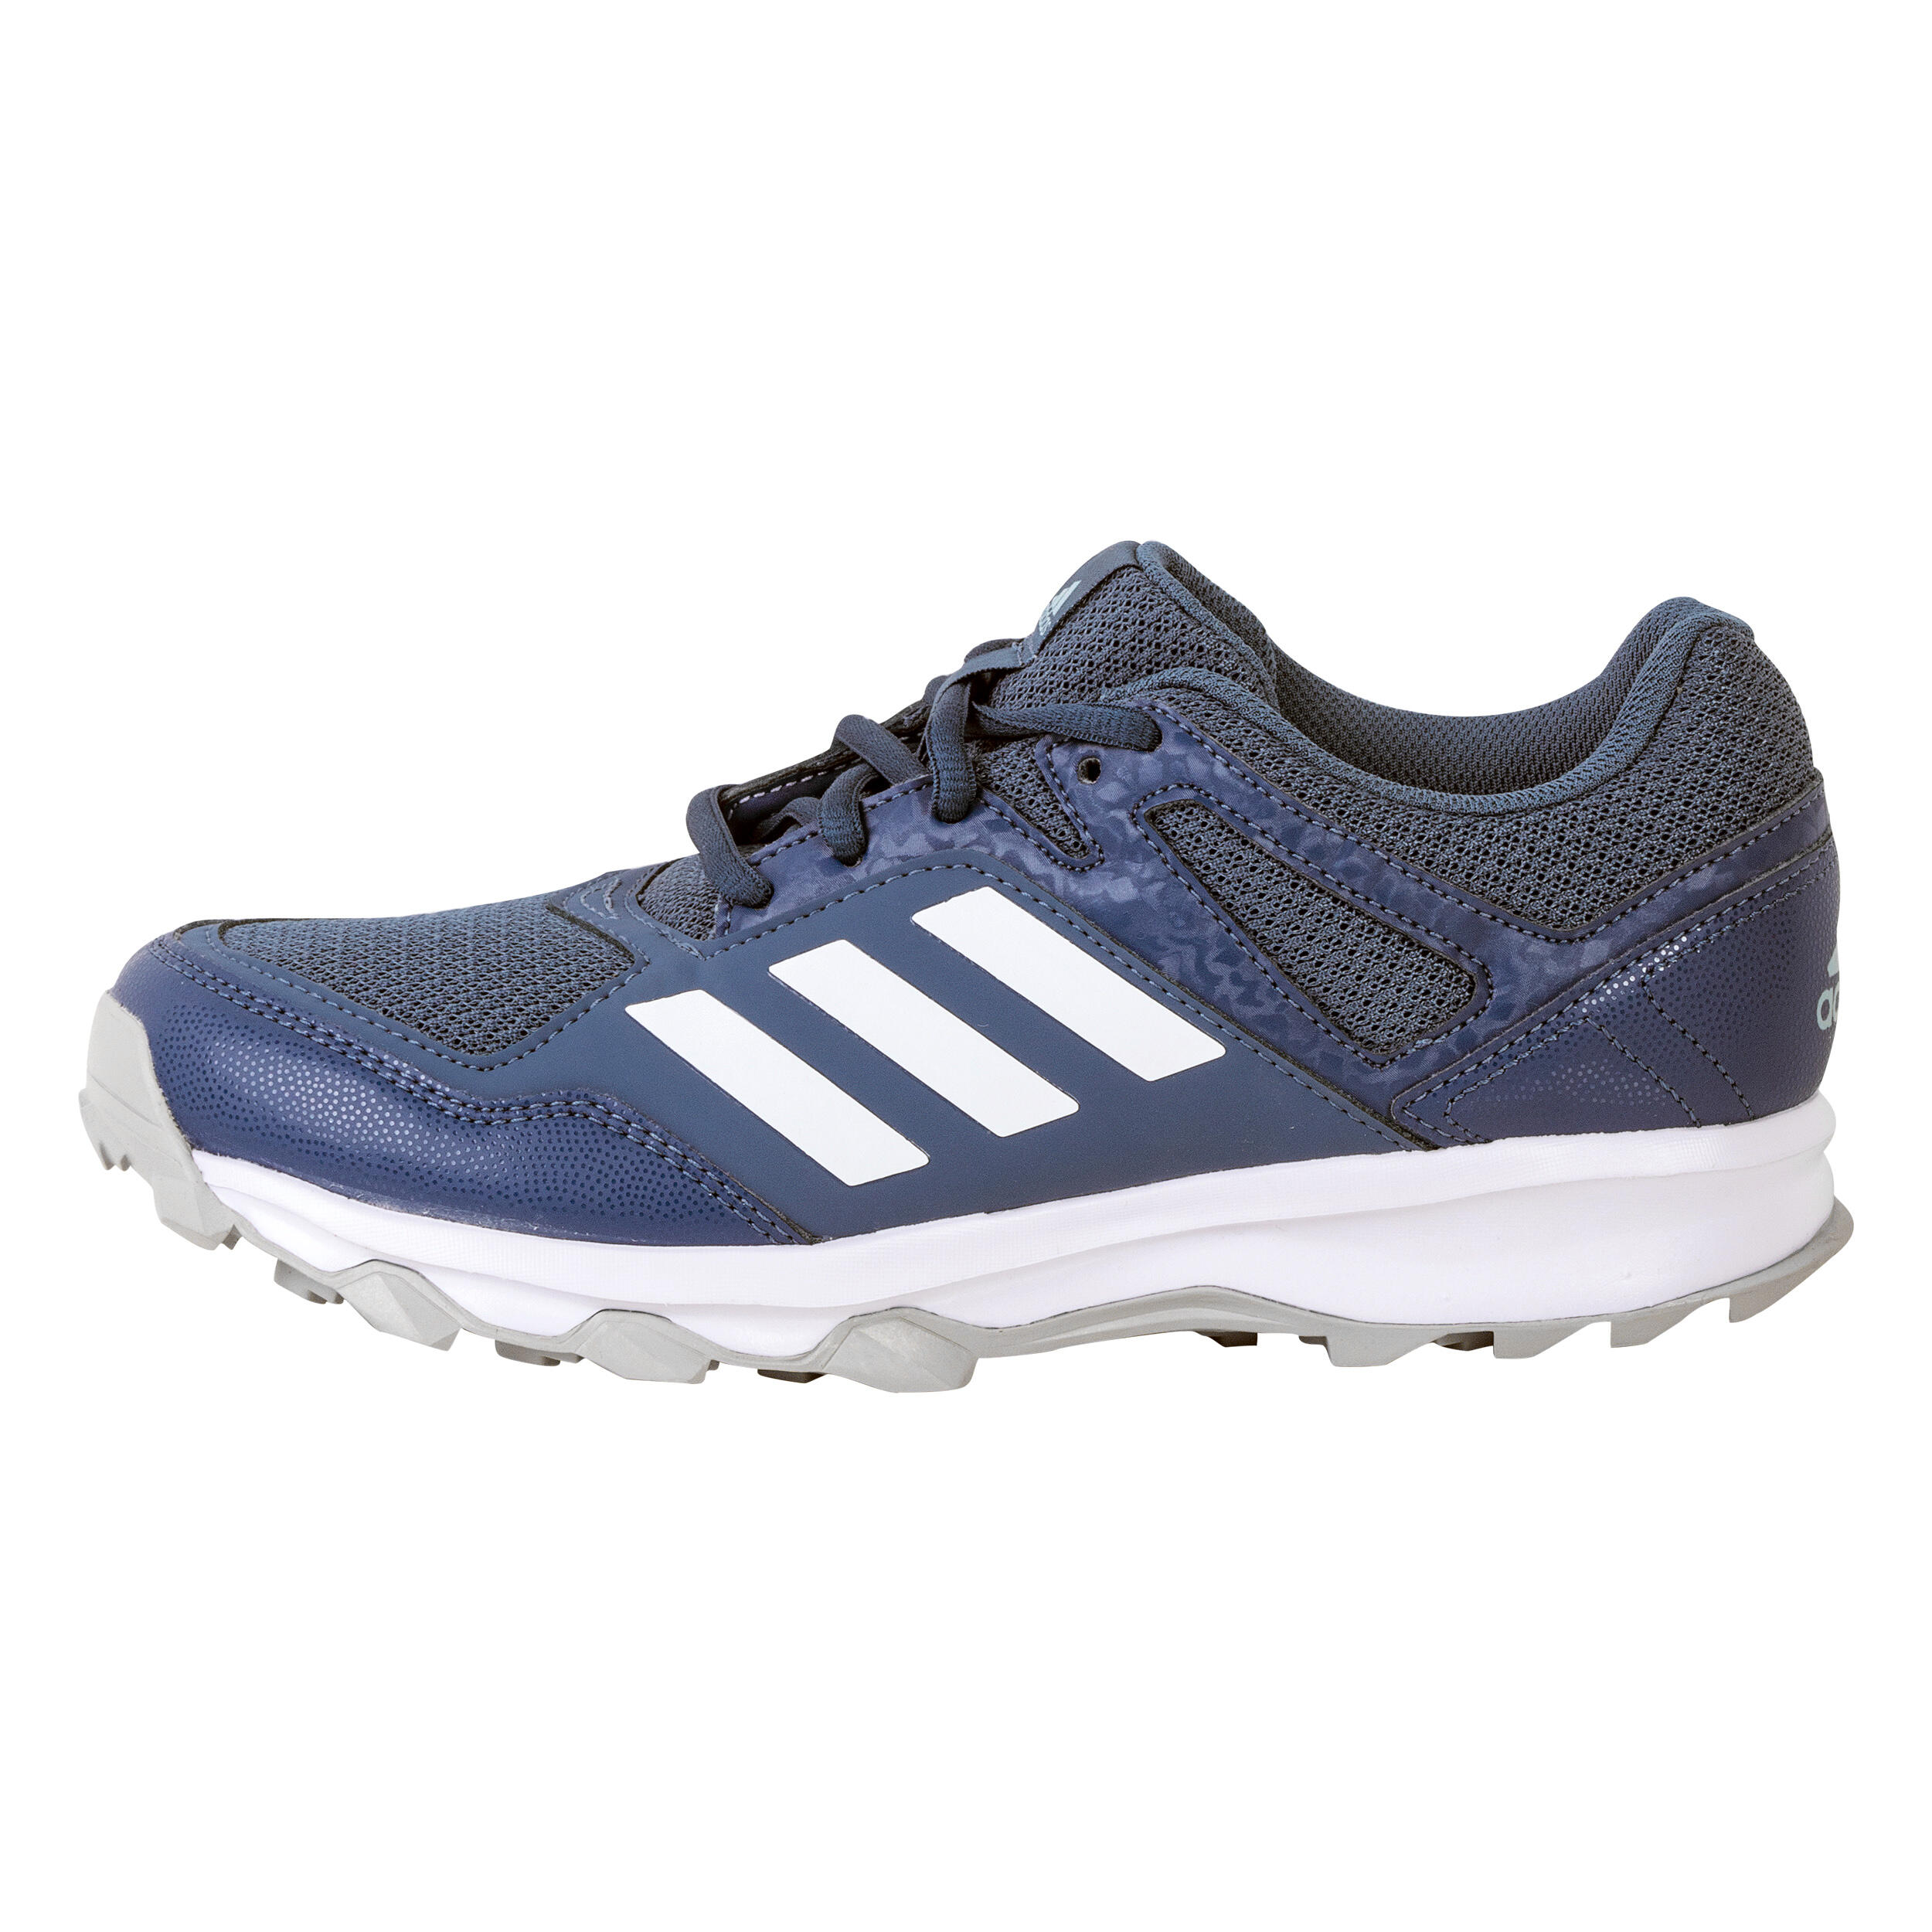 ADIDAS Women's Moderate- to High-Intensity Hockey Shoes Fabela Rise - Blue